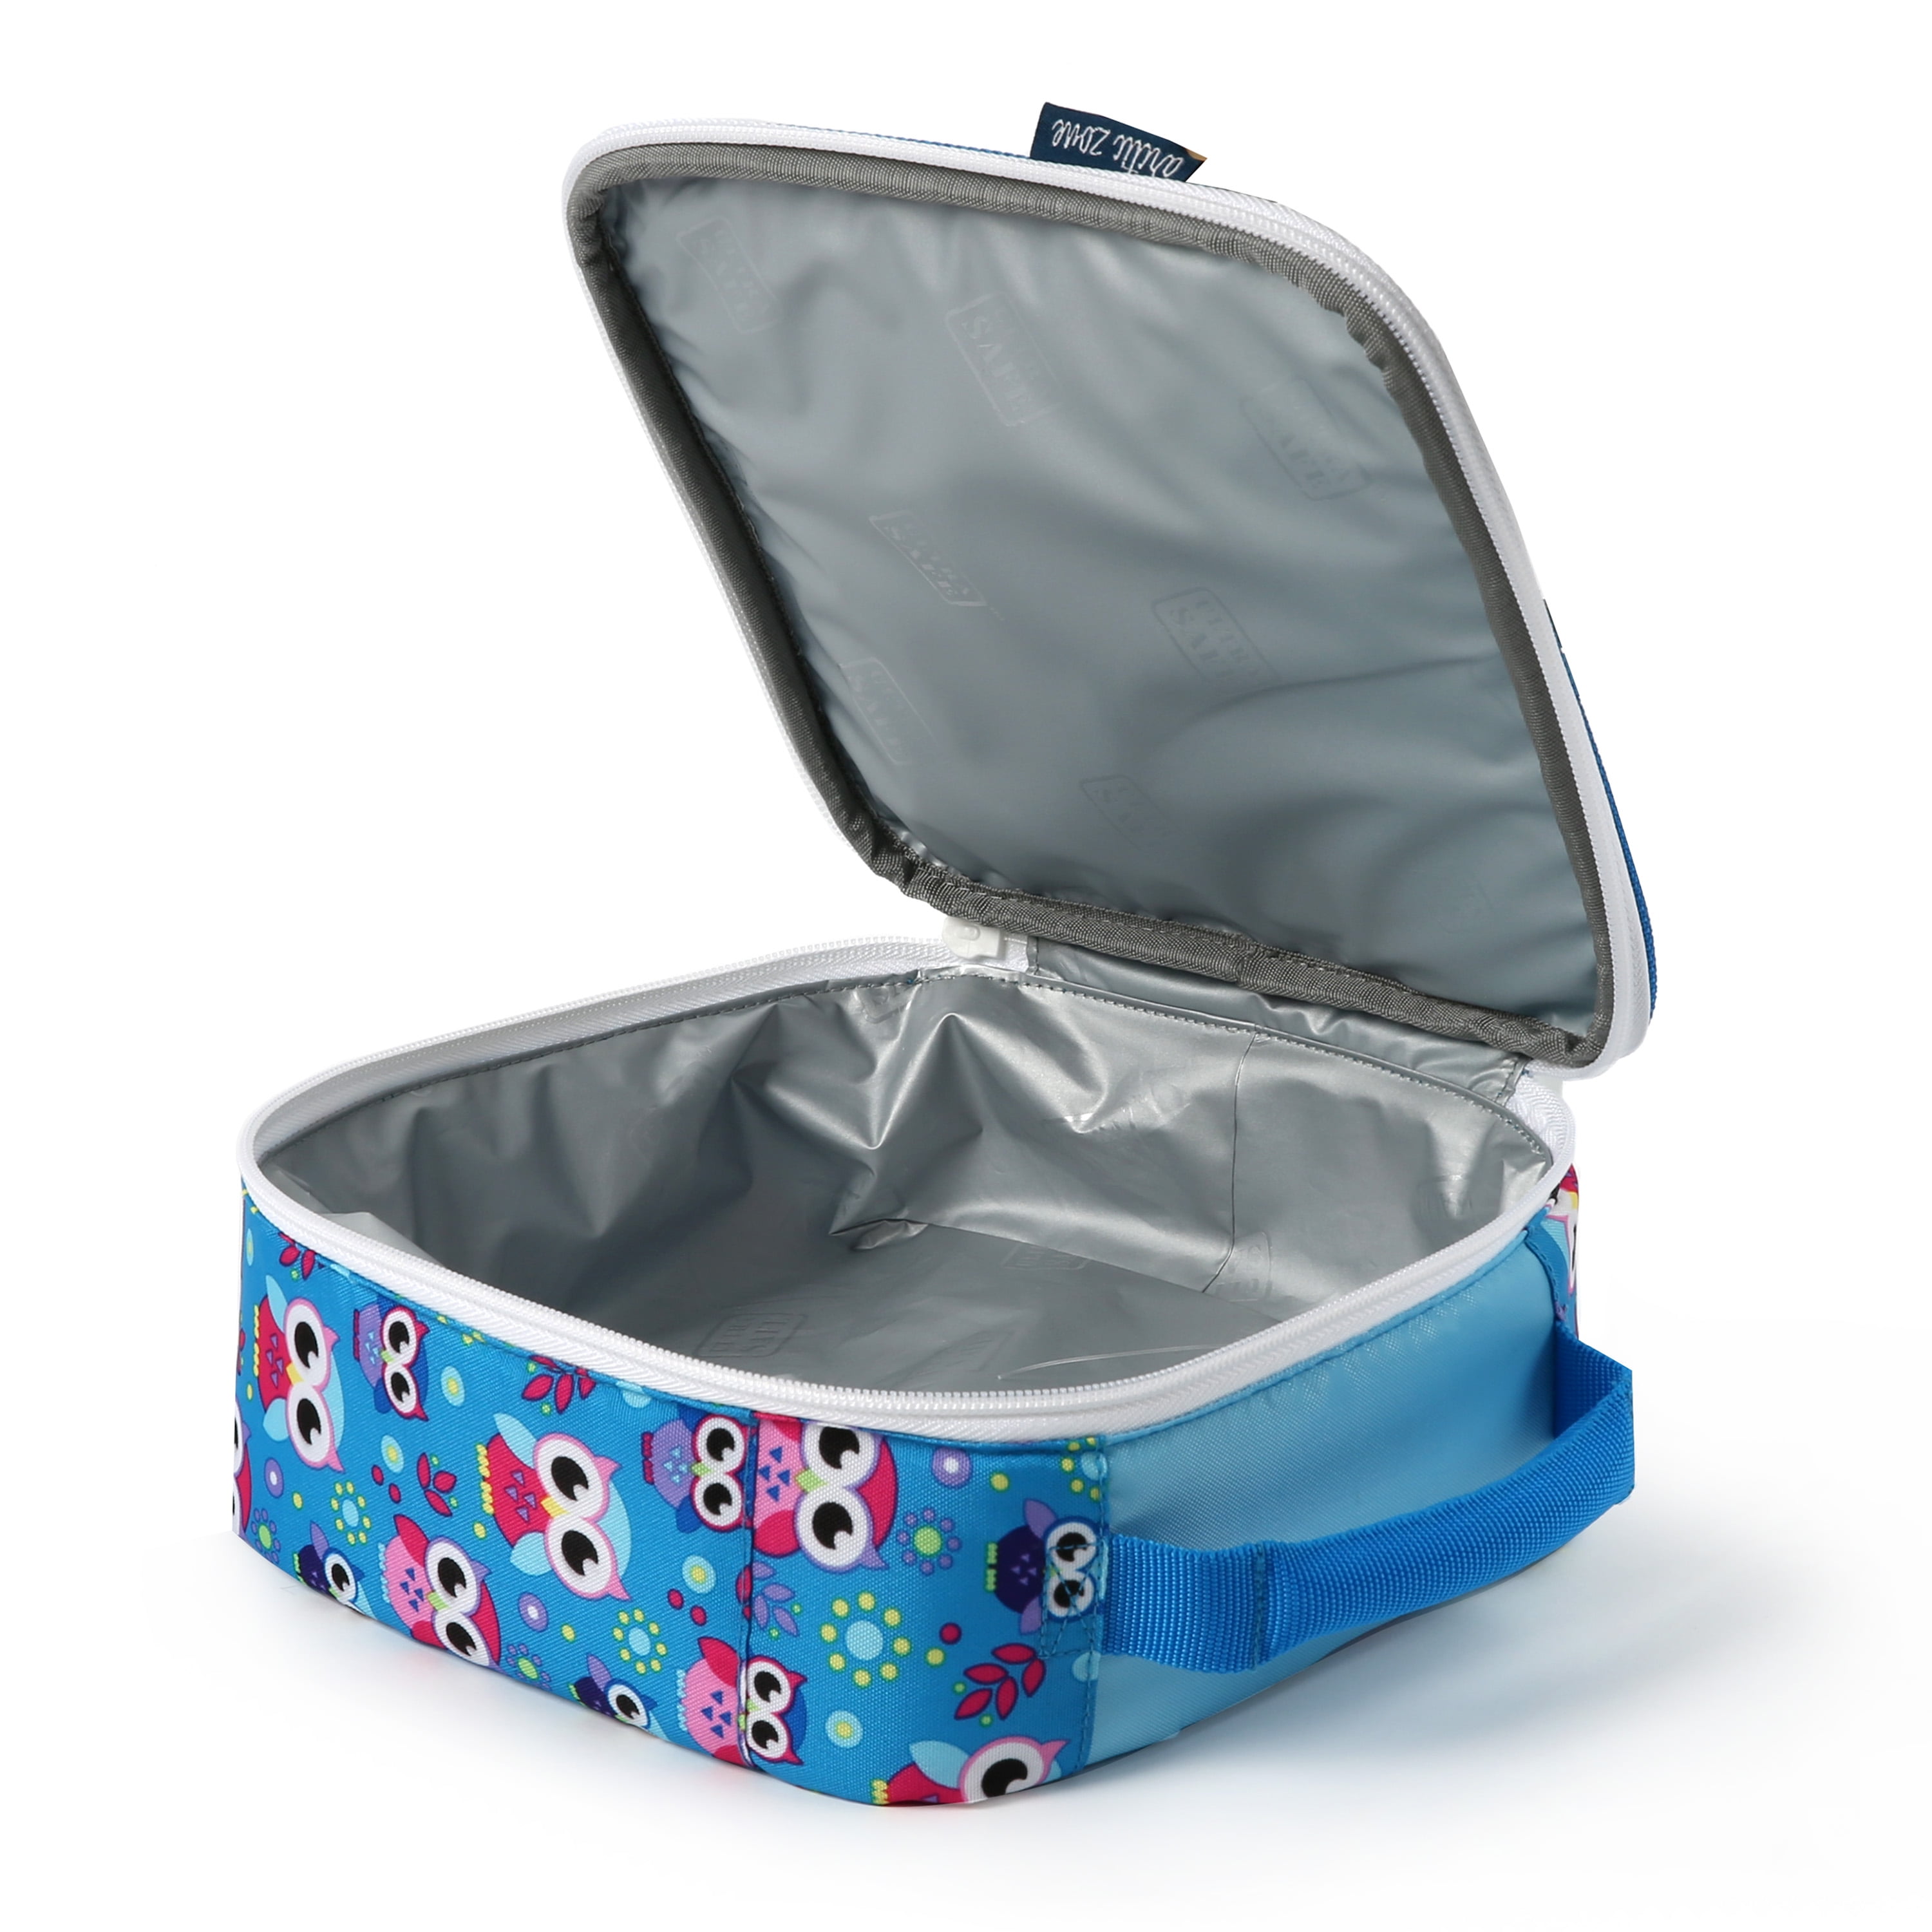 Arctic Zone Upright Reusable Lunch Box Combo with Accessories, Owls 